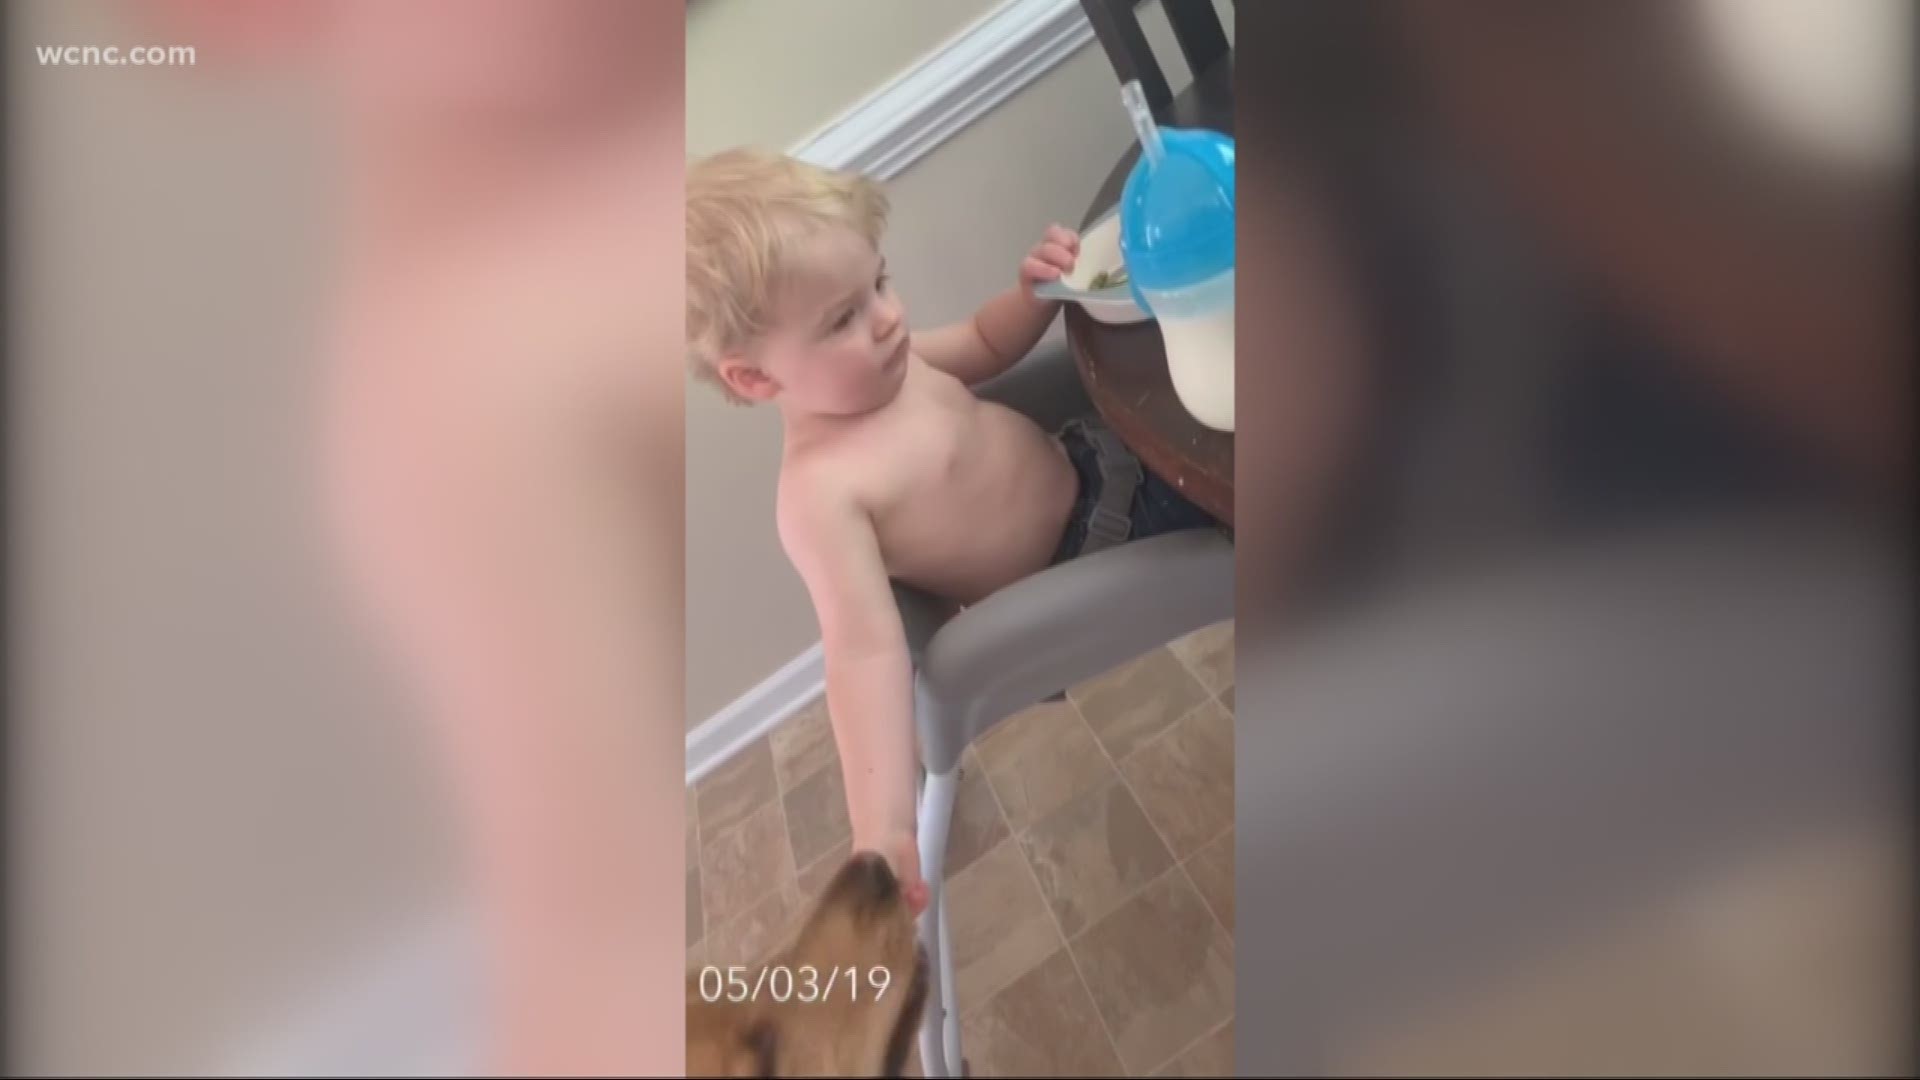 This little boy thought he'd pull a fast one on his mom by sneaking their dog green beans at the table. His mother had a different idea.